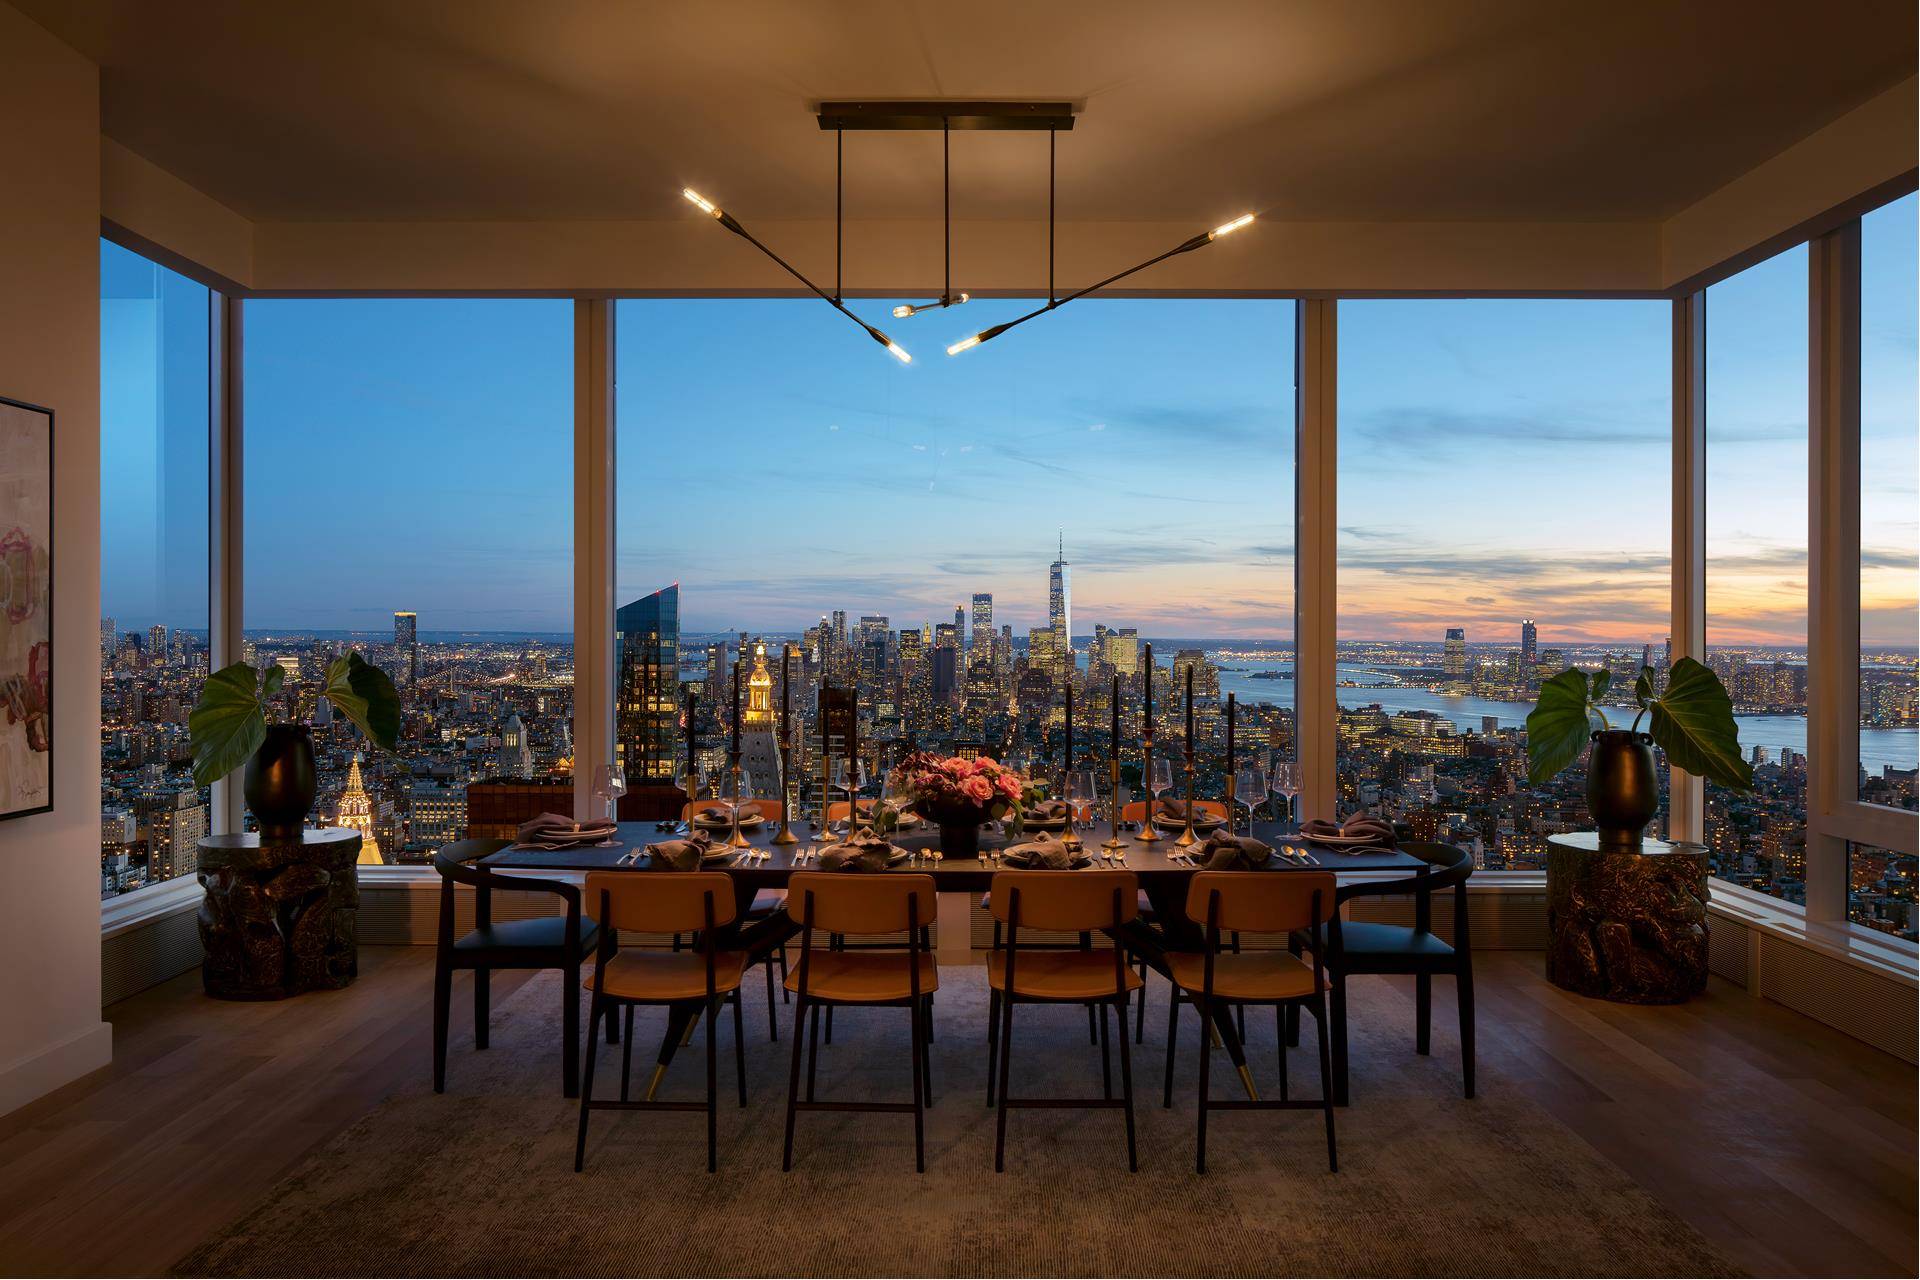 IMMEDIATE OCCUPANCY Penthouse 60A, the last remaining Penthouse and duplex available at Madison House, encompasses 5, 151 square feet, four bedrooms with den and five and a half baths, which ...